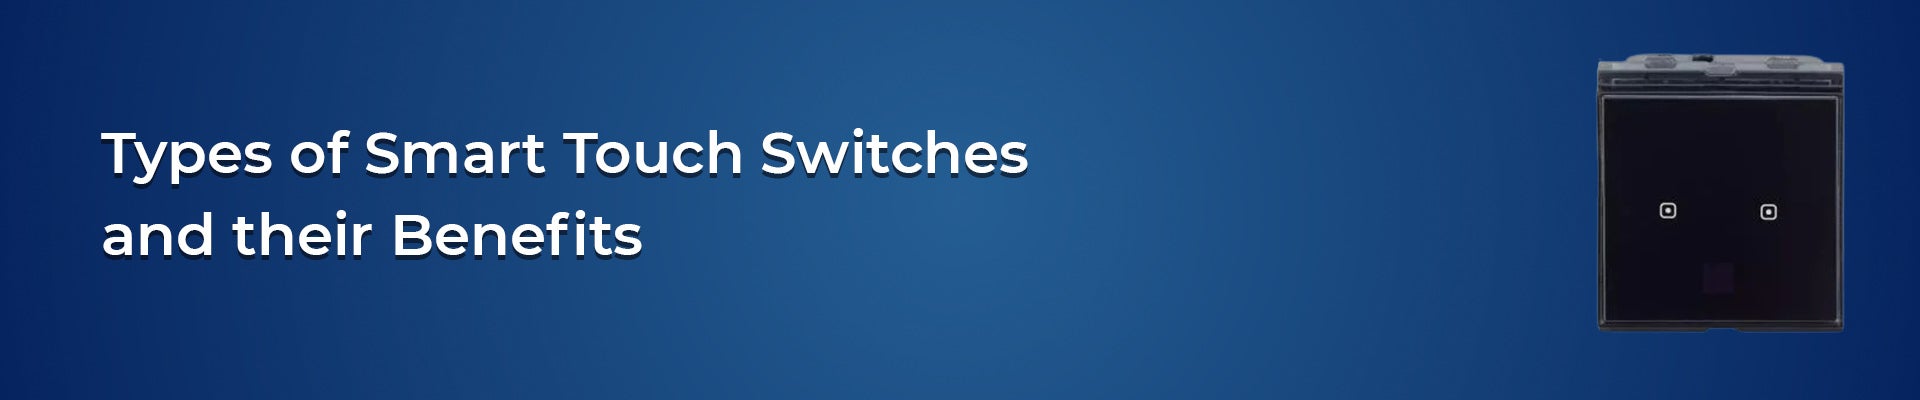 Types of Smart Touch Switches and their Benefits